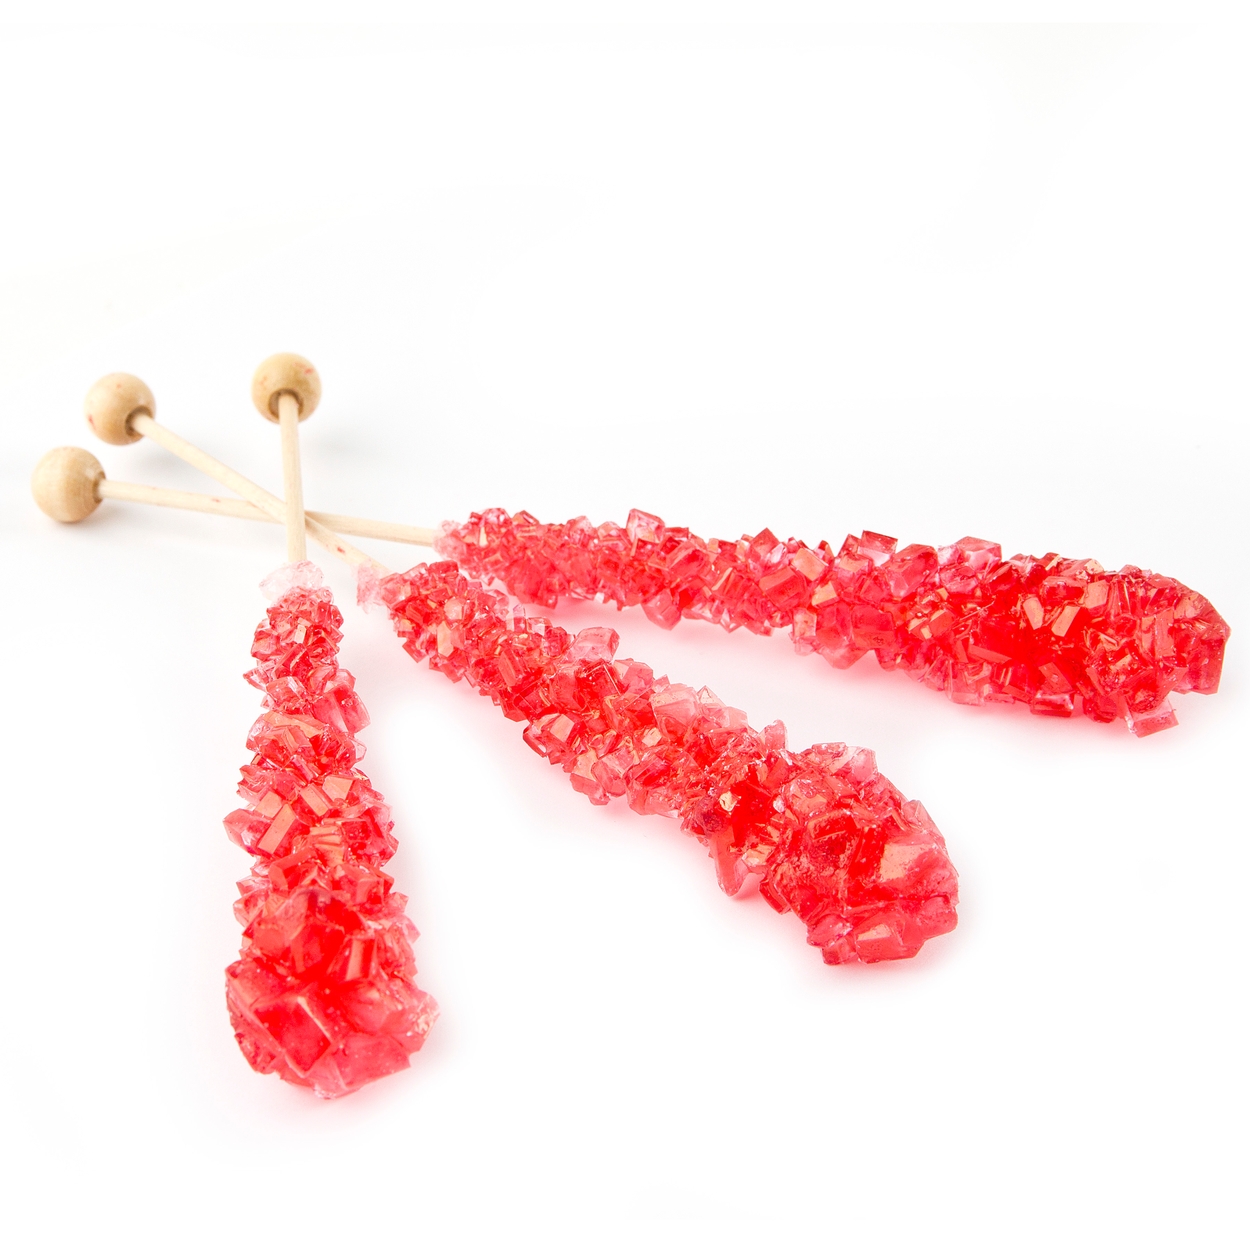 Red Rock Candy Crystals Strawberry